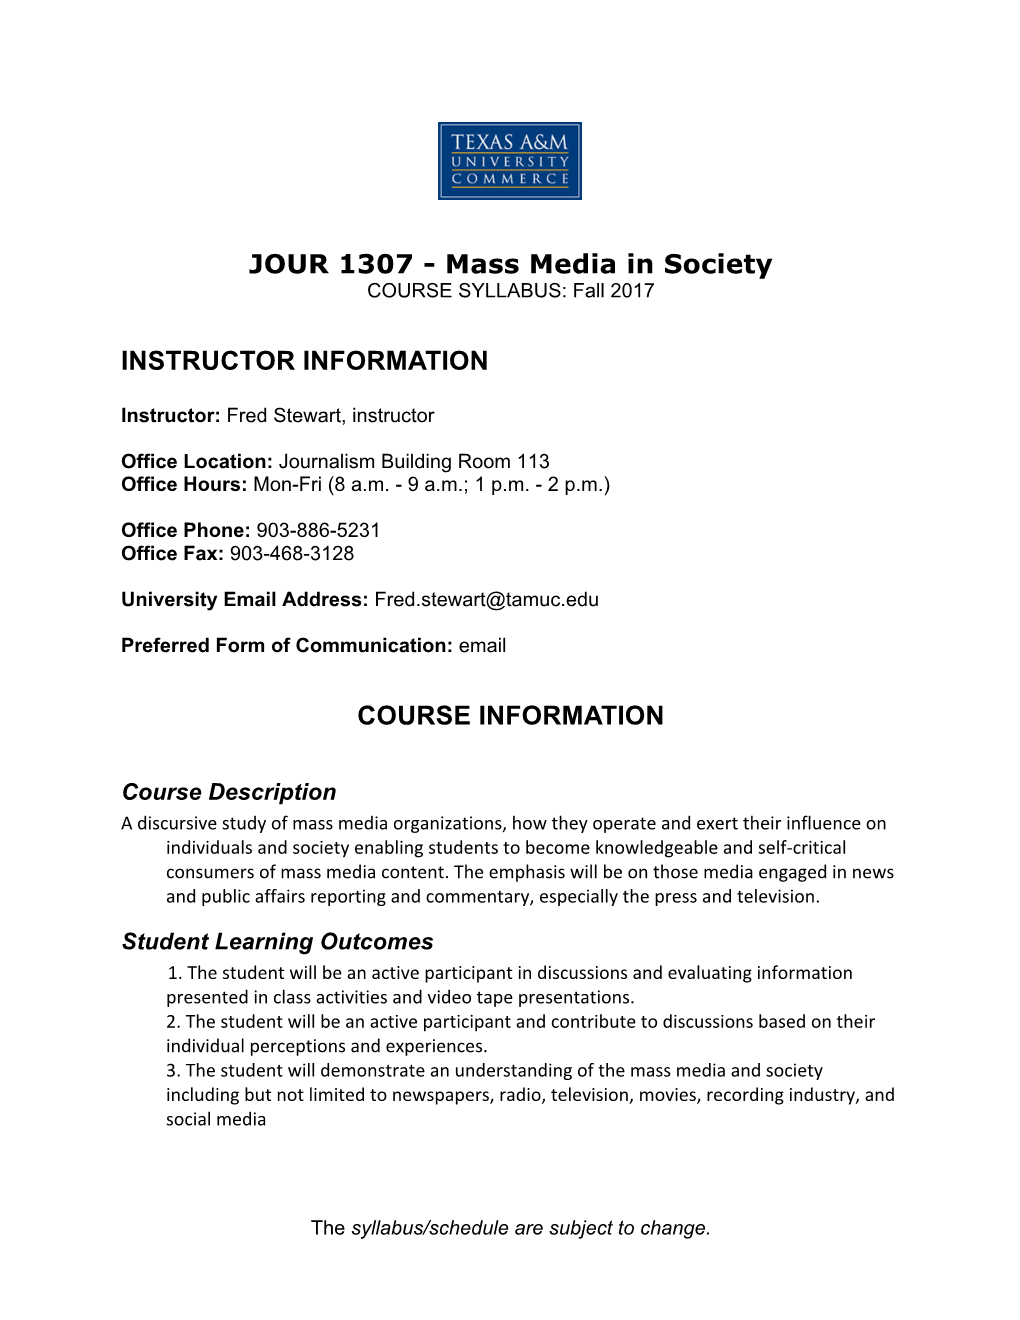 Mass Media in Society INSTRUCTOR INFORMATION COURSE